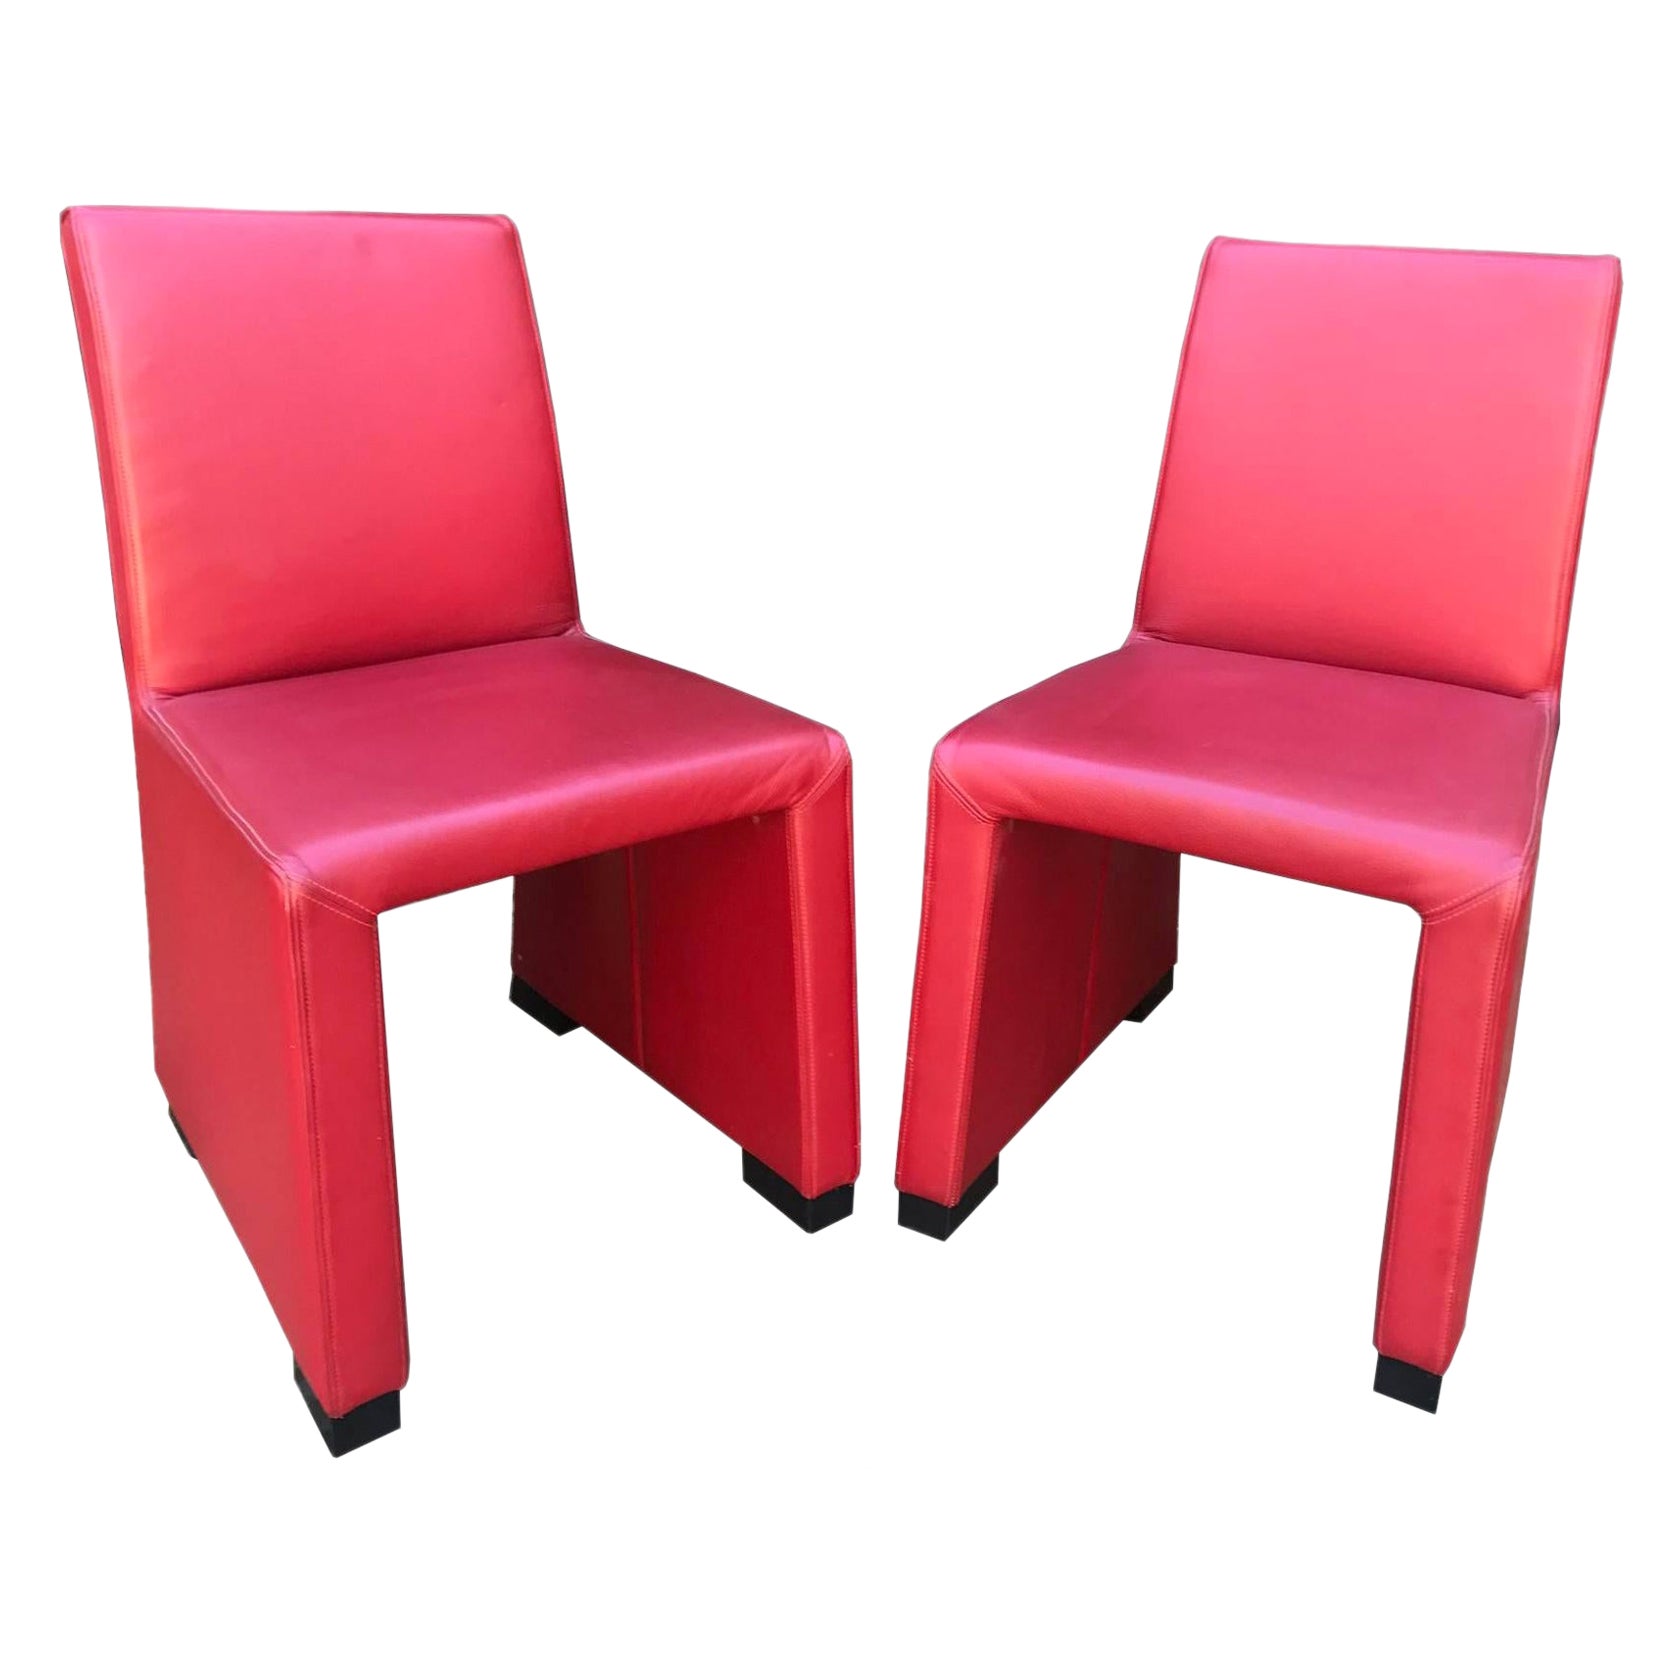 1980s Wittmann's Austrian Red Leather Chairs